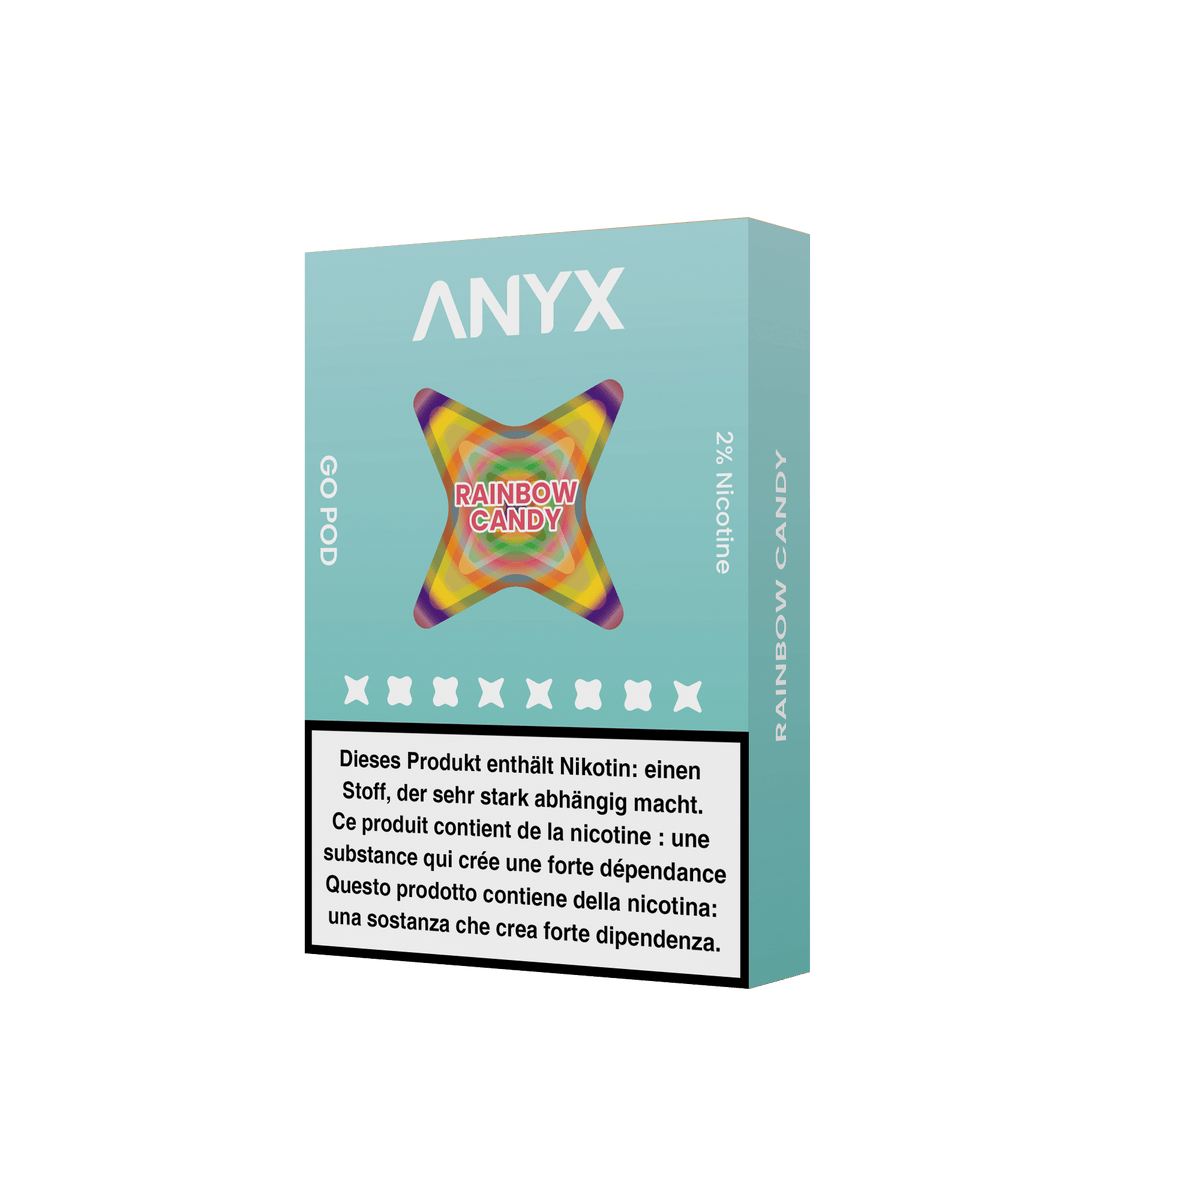 ANYX GO Pod - Rainbow Candy produces a remarkably full-flavored draw with every inhalation!  Looking for the taste of a rainbow? This blend of strawberry, grape, lemon, green apple, and orange is sure to dazzle the senses!  Compatible with the ANYX Pro and ANYX Go device, this product is crafted with organic cotton and a unique manufacturing process for superior vapour delivery and exceptional satisfaction.  Content: 3 ANYX GO Pods (2ml) per package